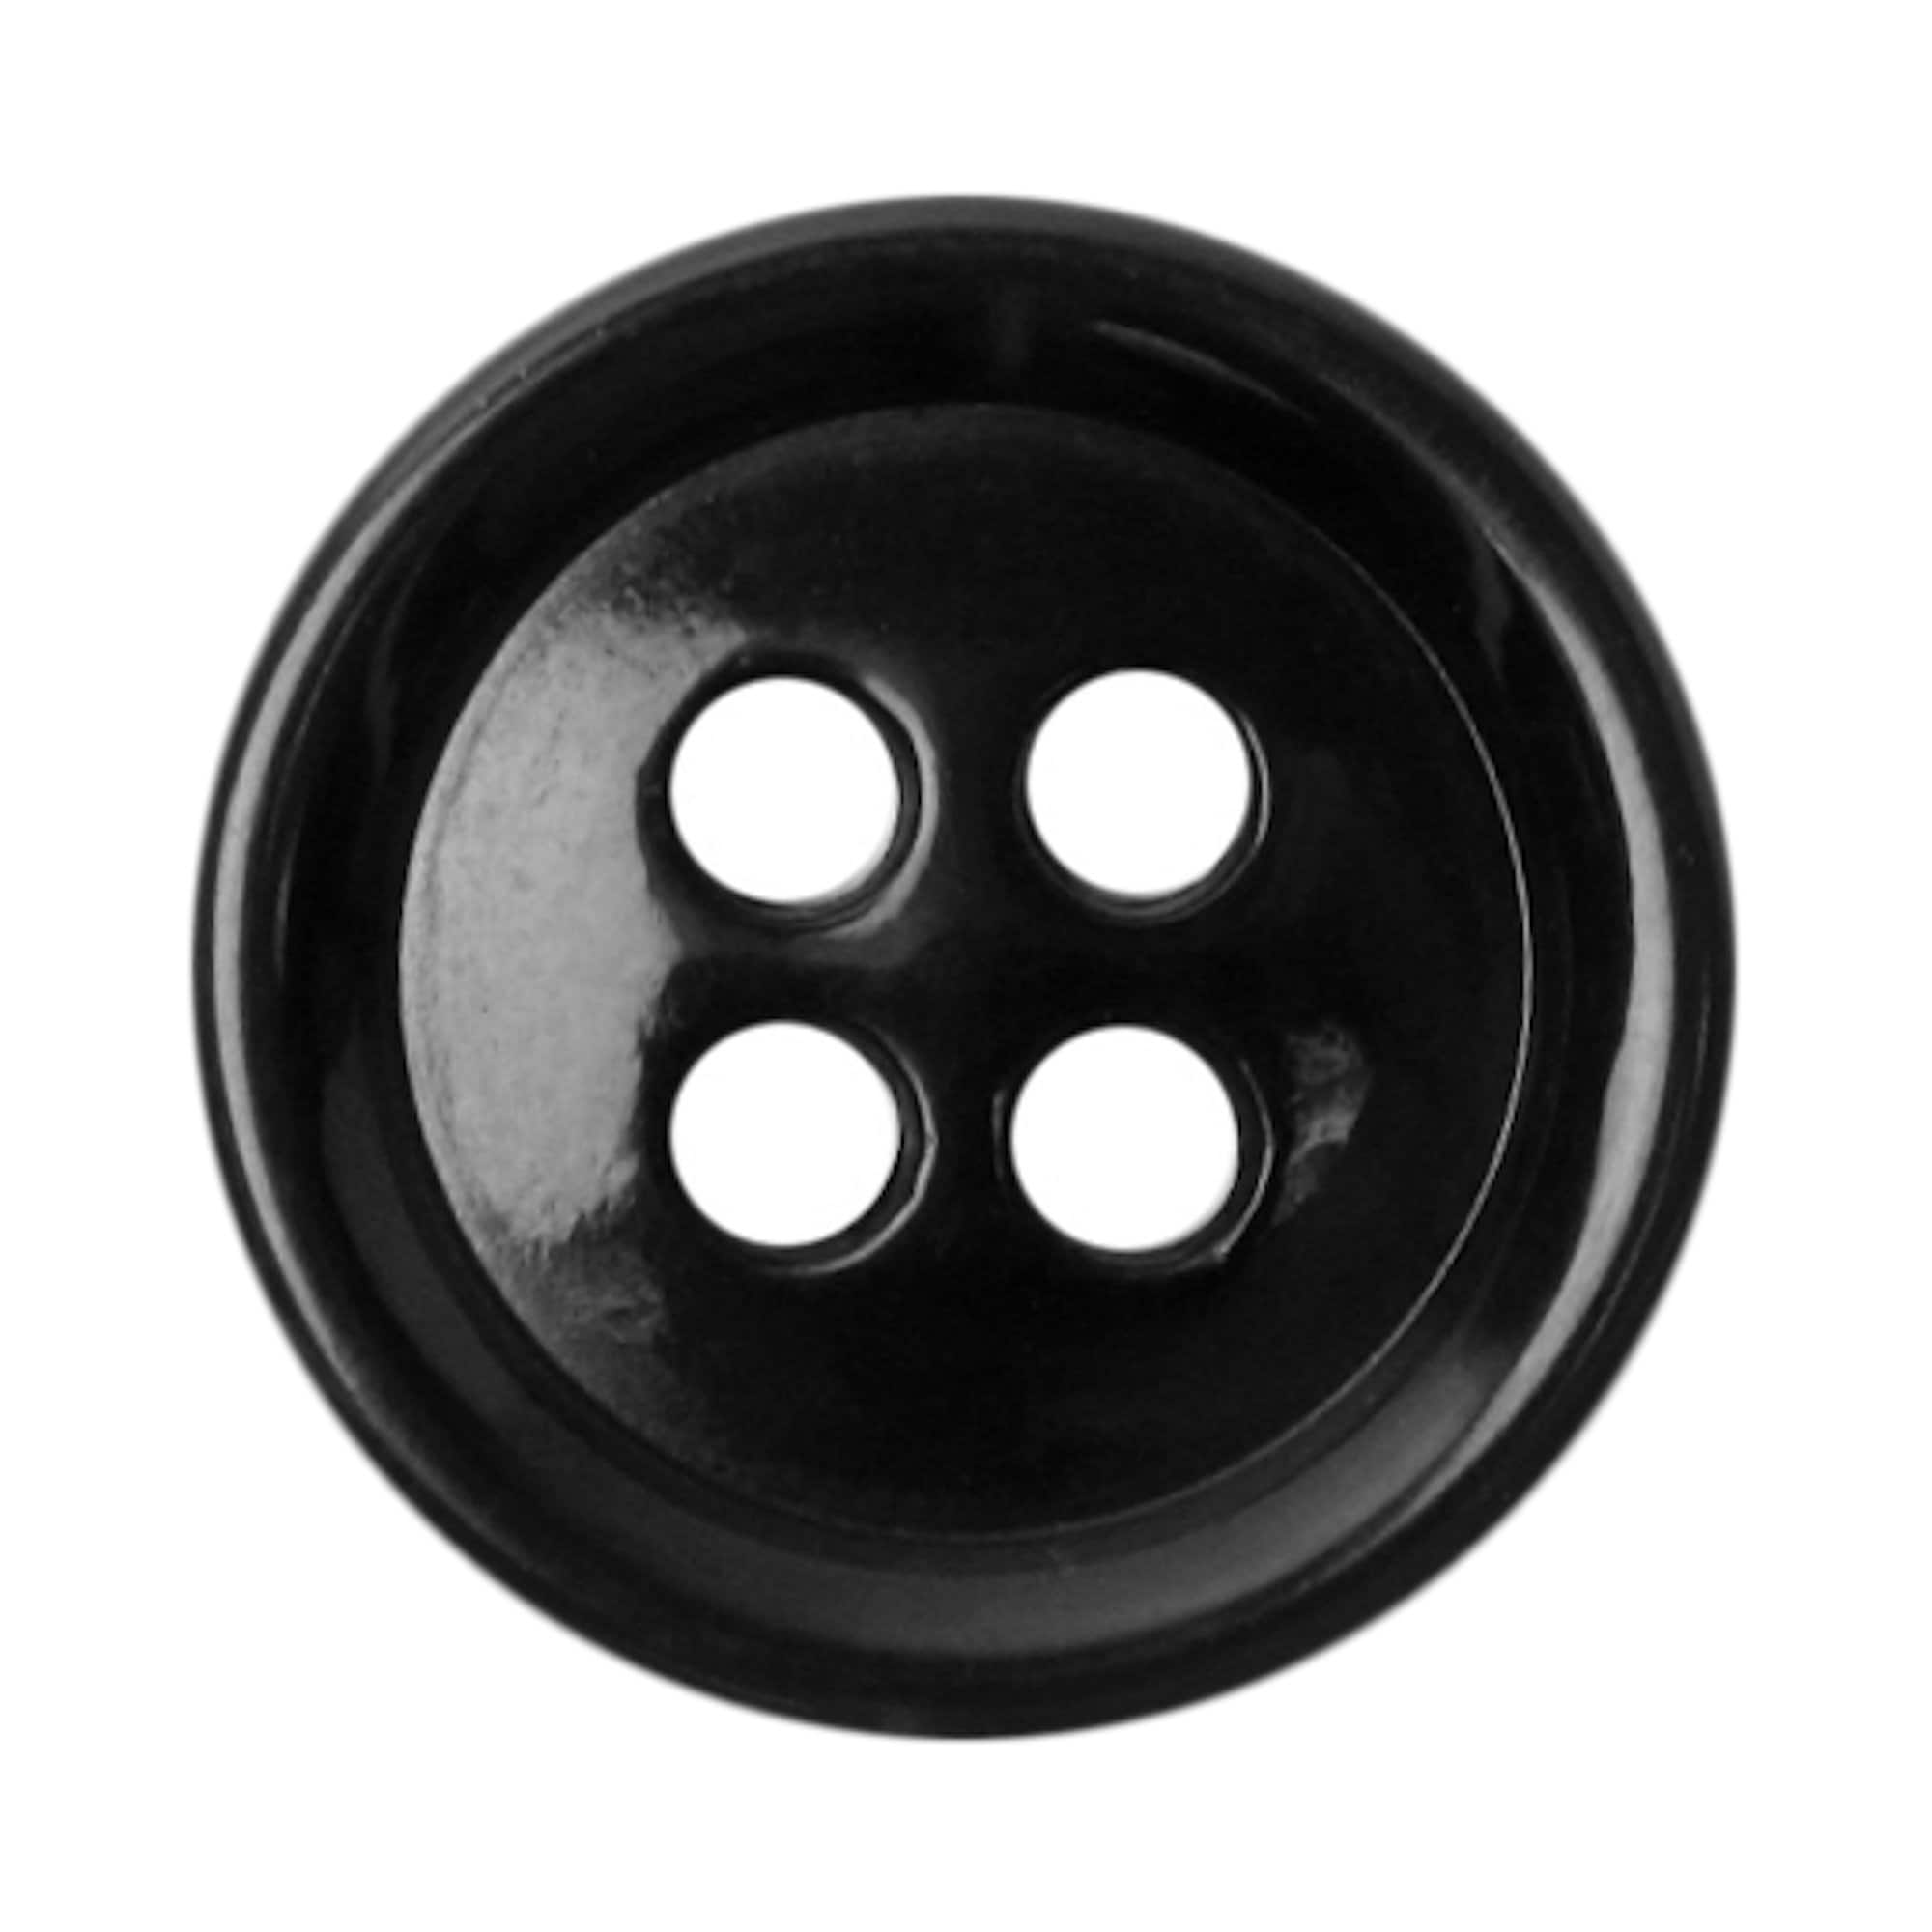 4 hole 2 hole 2 Sets on Cards Quality Black Buttons 17 mm 14 mm